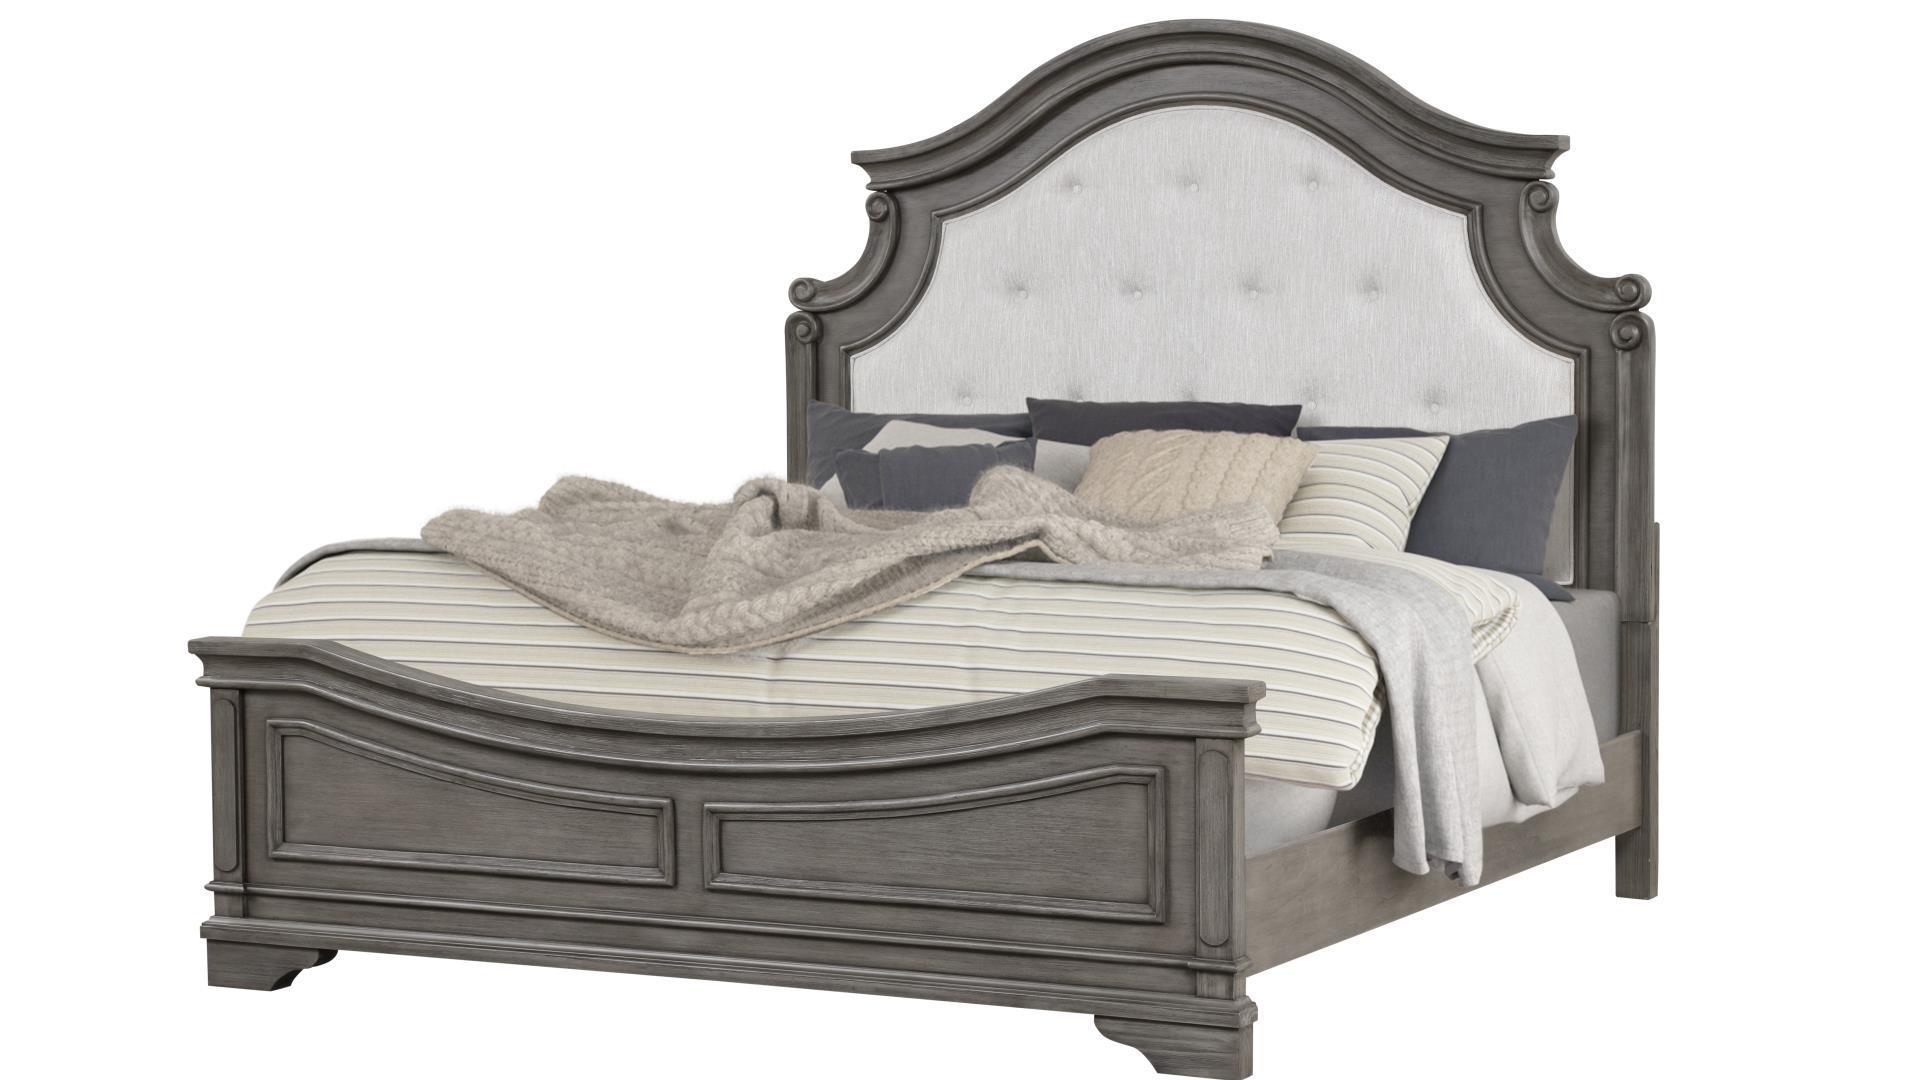 Classic, Traditional Platform Bed GRACE-Q-BED GRACE-Q-BED in Gray Fabric